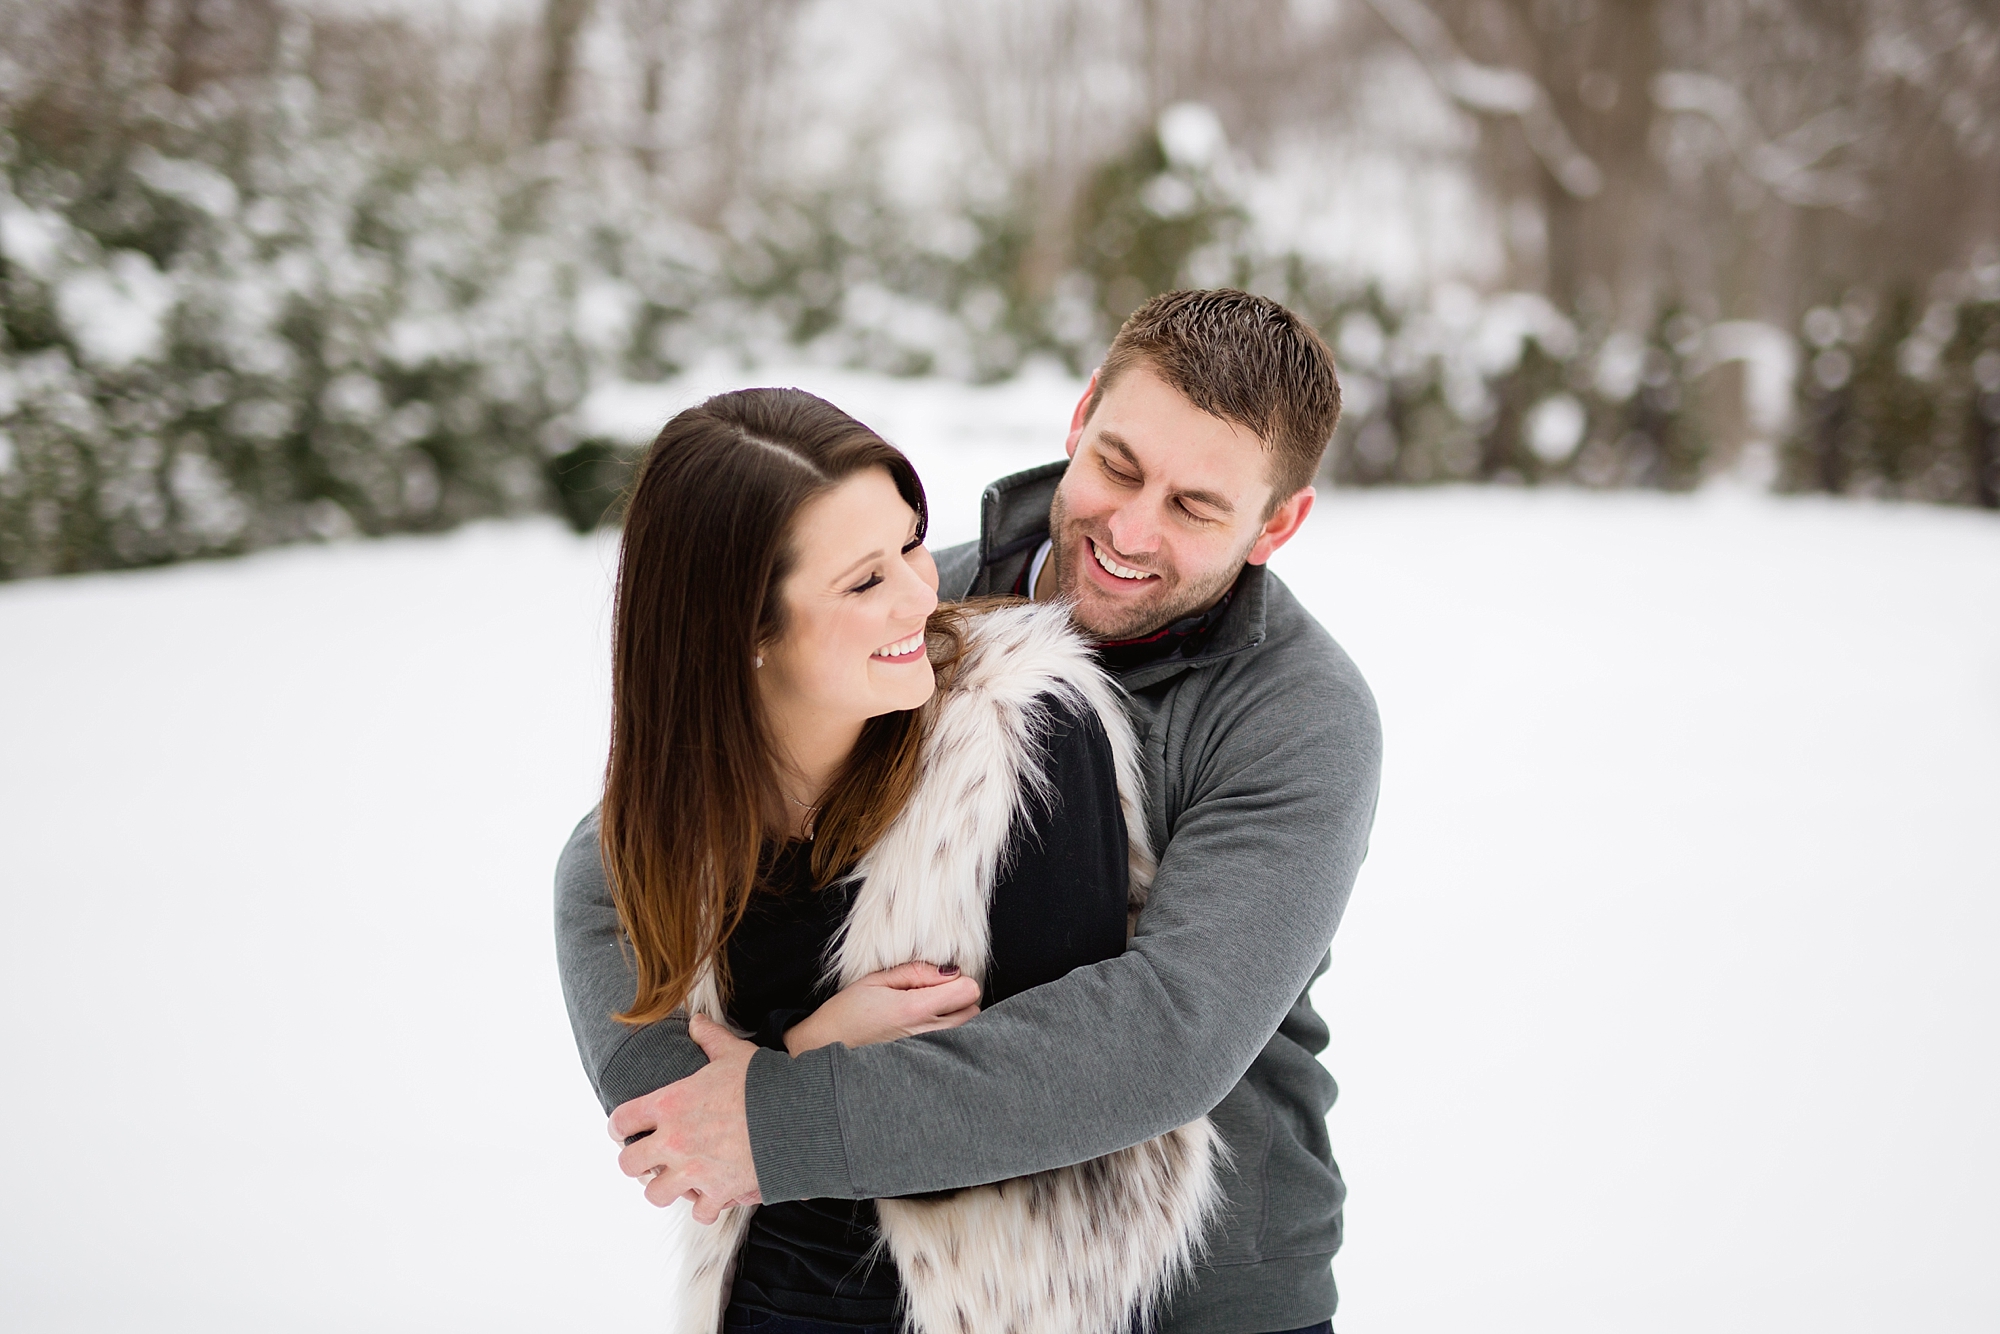 A snowy winter engagement at the Edsel and Eleanor Ford House in Grosse Pointe, Michigan by Breanne Rochelle Photography.